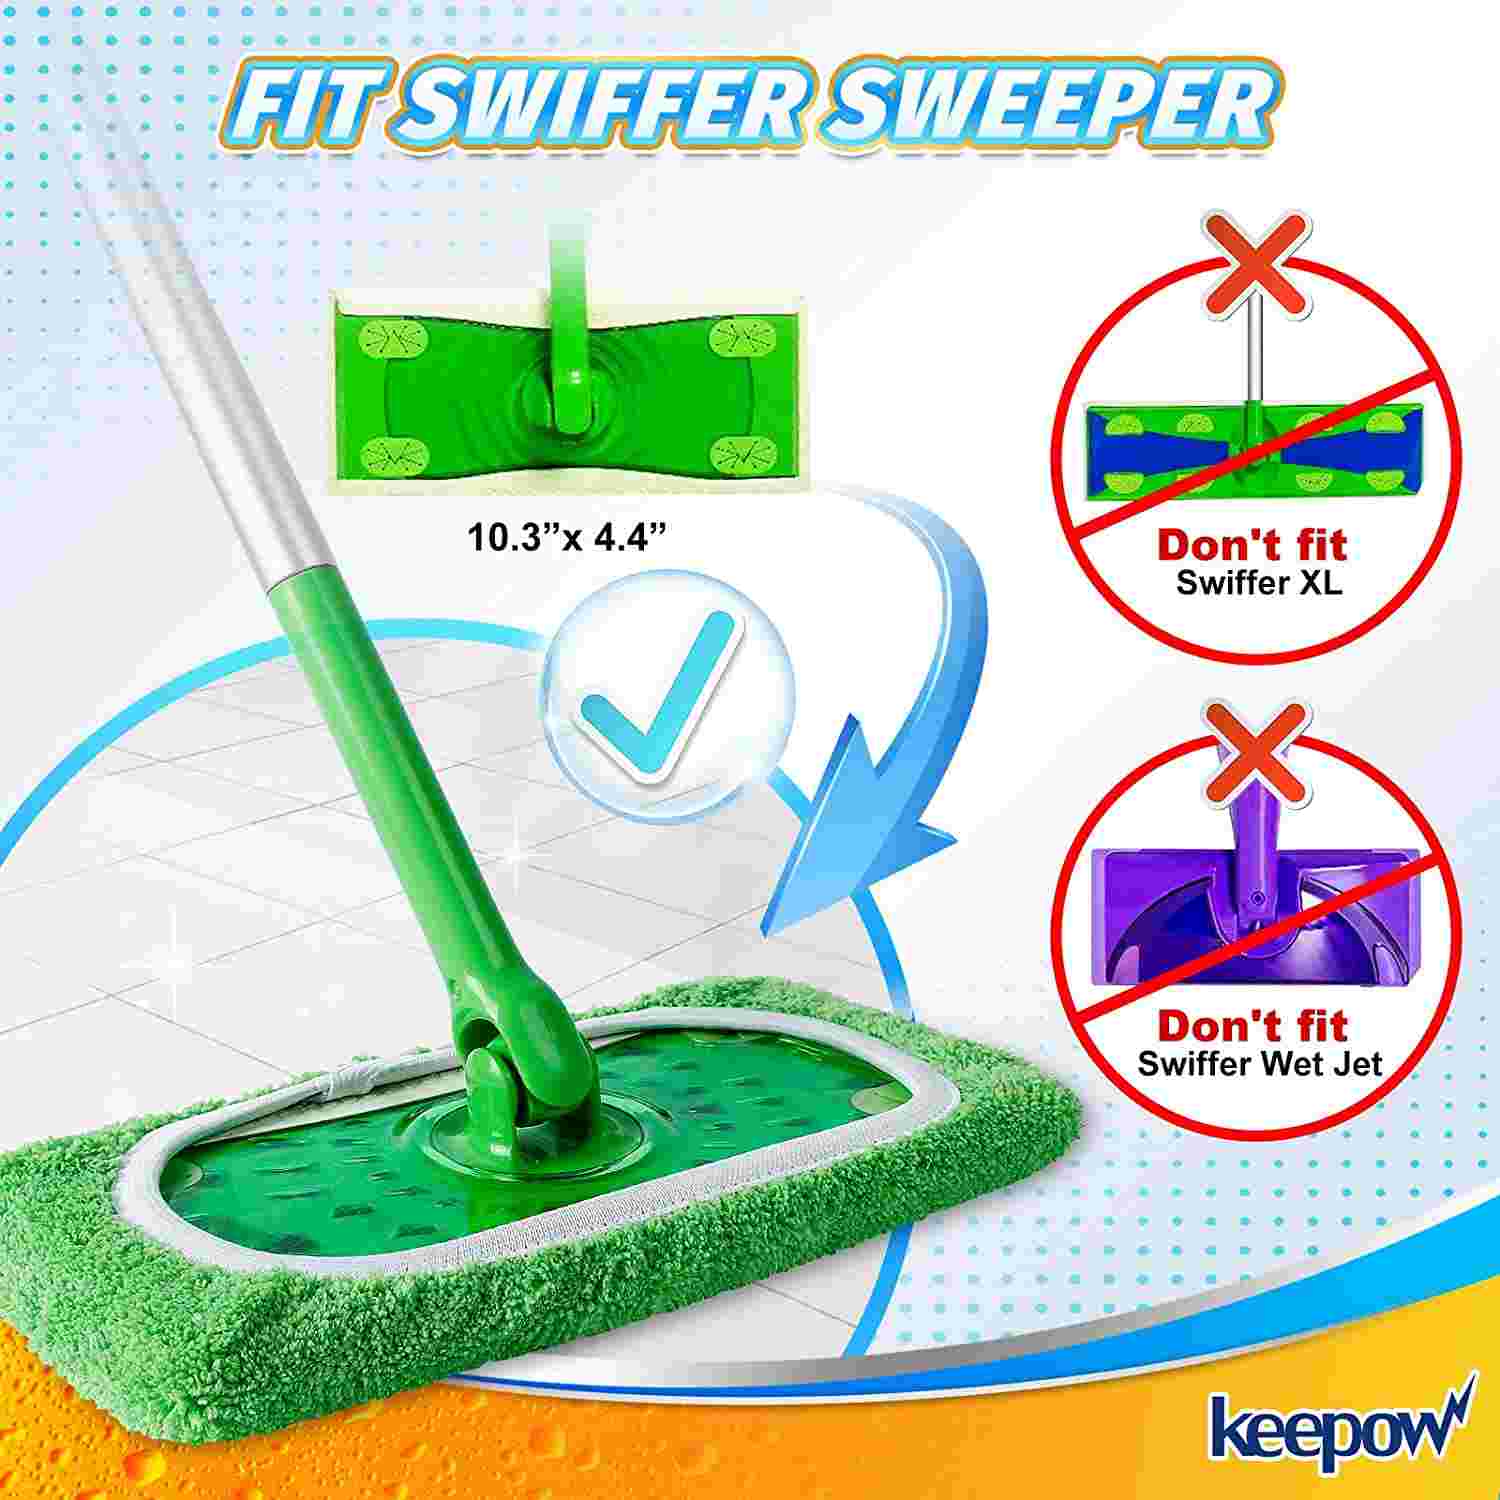 KEEPOW Reeusable Pads for Swiffer Sweeper Mop, 8 Pack, Green